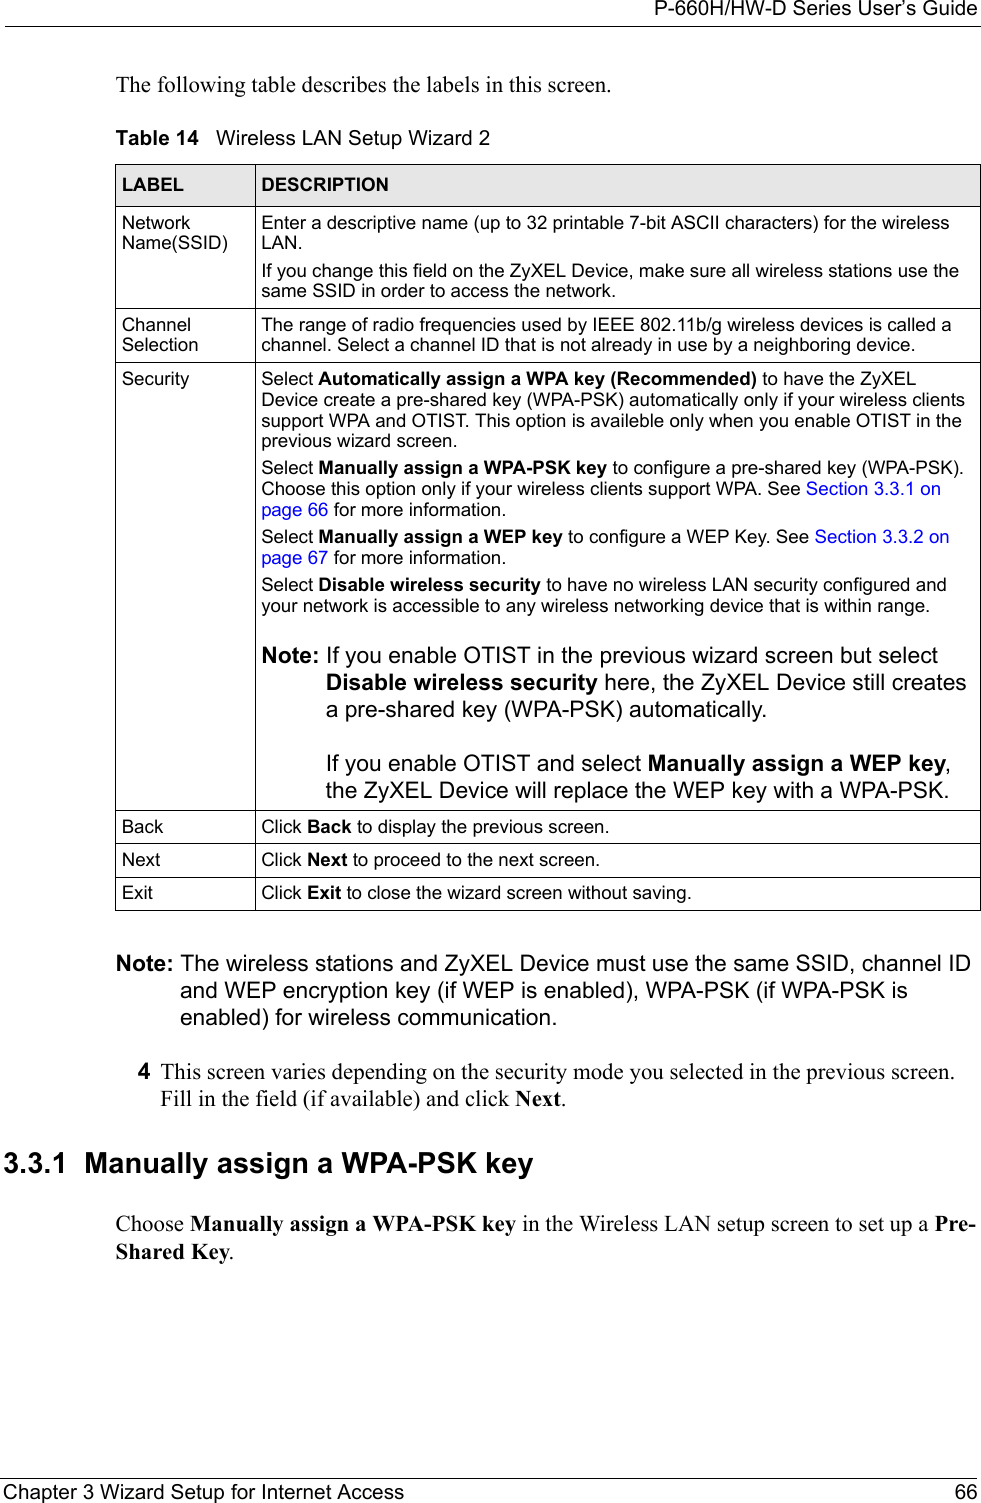 P-660H/HW-D Series User’s GuideChapter 3 Wizard Setup for Internet Access 66The following table describes the labels in this screen.Note: The wireless stations and ZyXEL Device must use the same SSID, channel ID and WEP encryption key (if WEP is enabled), WPA-PSK (if WPA-PSK is enabled) for wireless communication.4This screen varies depending on the security mode you selected in the previous screen. Fill in the field (if available) and click Next.3.3.1  Manually assign a WPA-PSK keyChoose Manually assign a WPA-PSK key in the Wireless LAN setup screen to set up a Pre-Shared Key.Table 14   Wireless LAN Setup Wizard 2LABEL DESCRIPTIONNetwork Name(SSID)Enter a descriptive name (up to 32 printable 7-bit ASCII characters) for the wireless LAN. If you change this field on the ZyXEL Device, make sure all wireless stations use the same SSID in order to access the network. Channel SelectionThe range of radio frequencies used by IEEE 802.11b/g wireless devices is called a channel. Select a channel ID that is not already in use by a neighboring device.Security Select Automatically assign a WPA key (Recommended) to have the ZyXEL Device create a pre-shared key (WPA-PSK) automatically only if your wireless clients support WPA and OTIST. This option is availeble only when you enable OTIST in the previous wizard screen.Select Manually assign a WPA-PSK key to configure a pre-shared key (WPA-PSK). Choose this option only if your wireless clients support WPA. See Section 3.3.1 on page 66 for more information.Select Manually assign a WEP key to configure a WEP Key. See Section 3.3.2 on page 67 for more information.Select Disable wireless security to have no wireless LAN security configured and your network is accessible to any wireless networking device that is within range.Note: If you enable OTIST in the previous wizard screen but select Disable wireless security here, the ZyXEL Device still creates a pre-shared key (WPA-PSK) automatically.If you enable OTIST and select Manually assign a WEP key, the ZyXEL Device will replace the WEP key with a WPA-PSK.Back Click Back to display the previous screen.Next Click Next to proceed to the next screen. Exit Click Exit to close the wizard screen without saving.